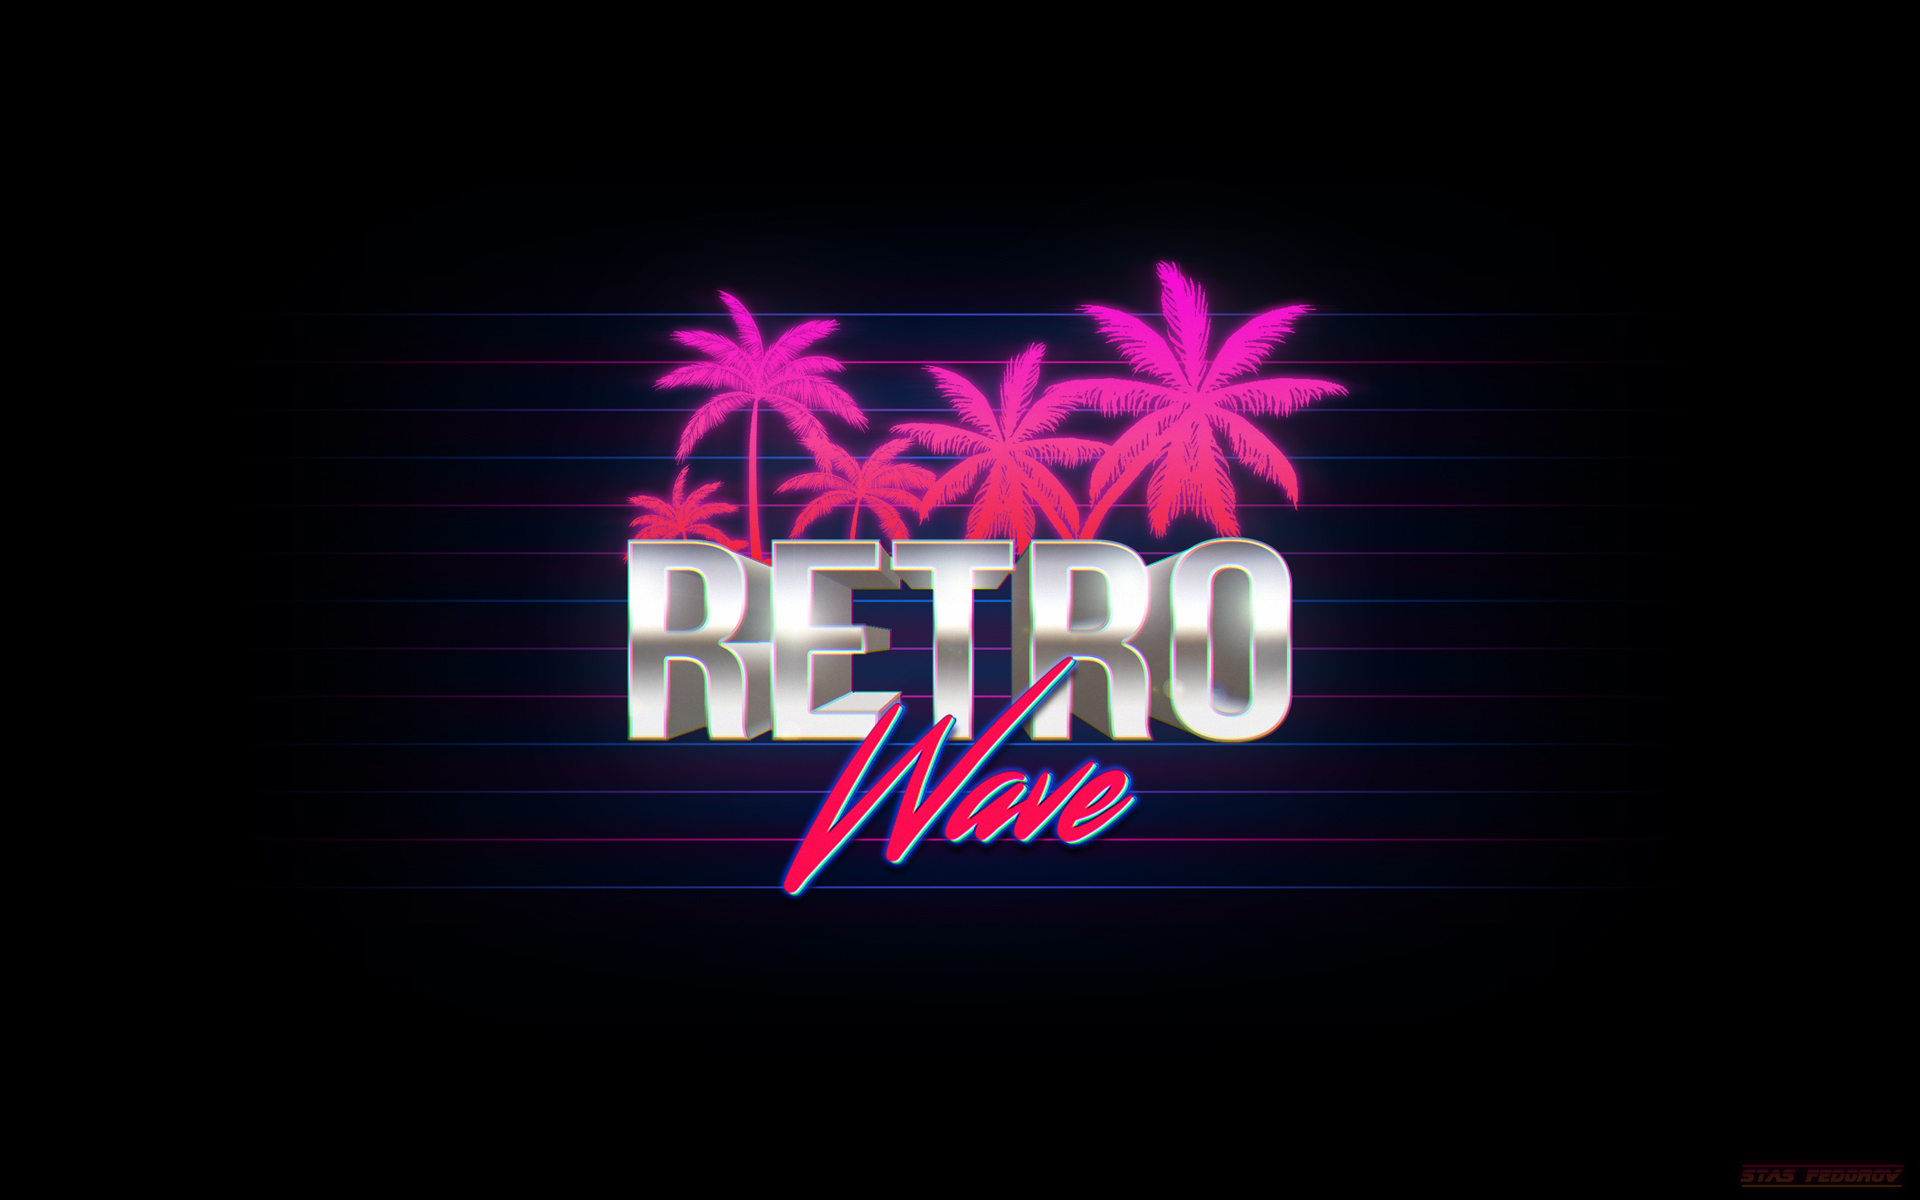 Illustration Neon Synthwave Typography 1920x1200